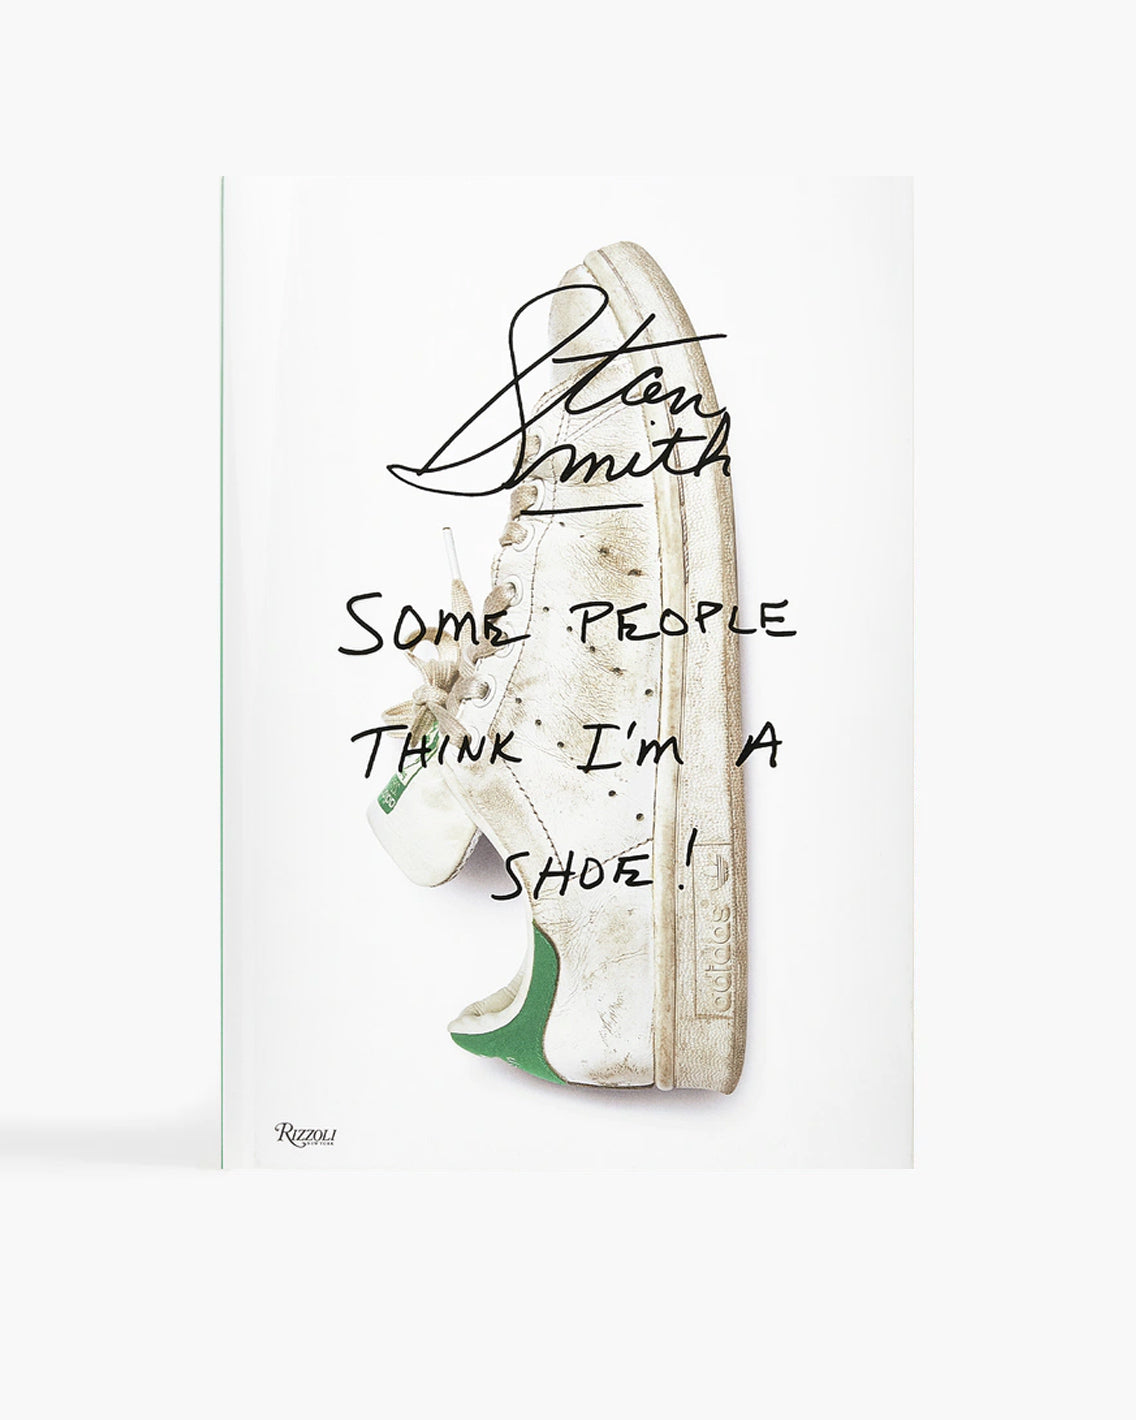 Rizzoli - Stan Smith - Some People Think I'm A Shoe!